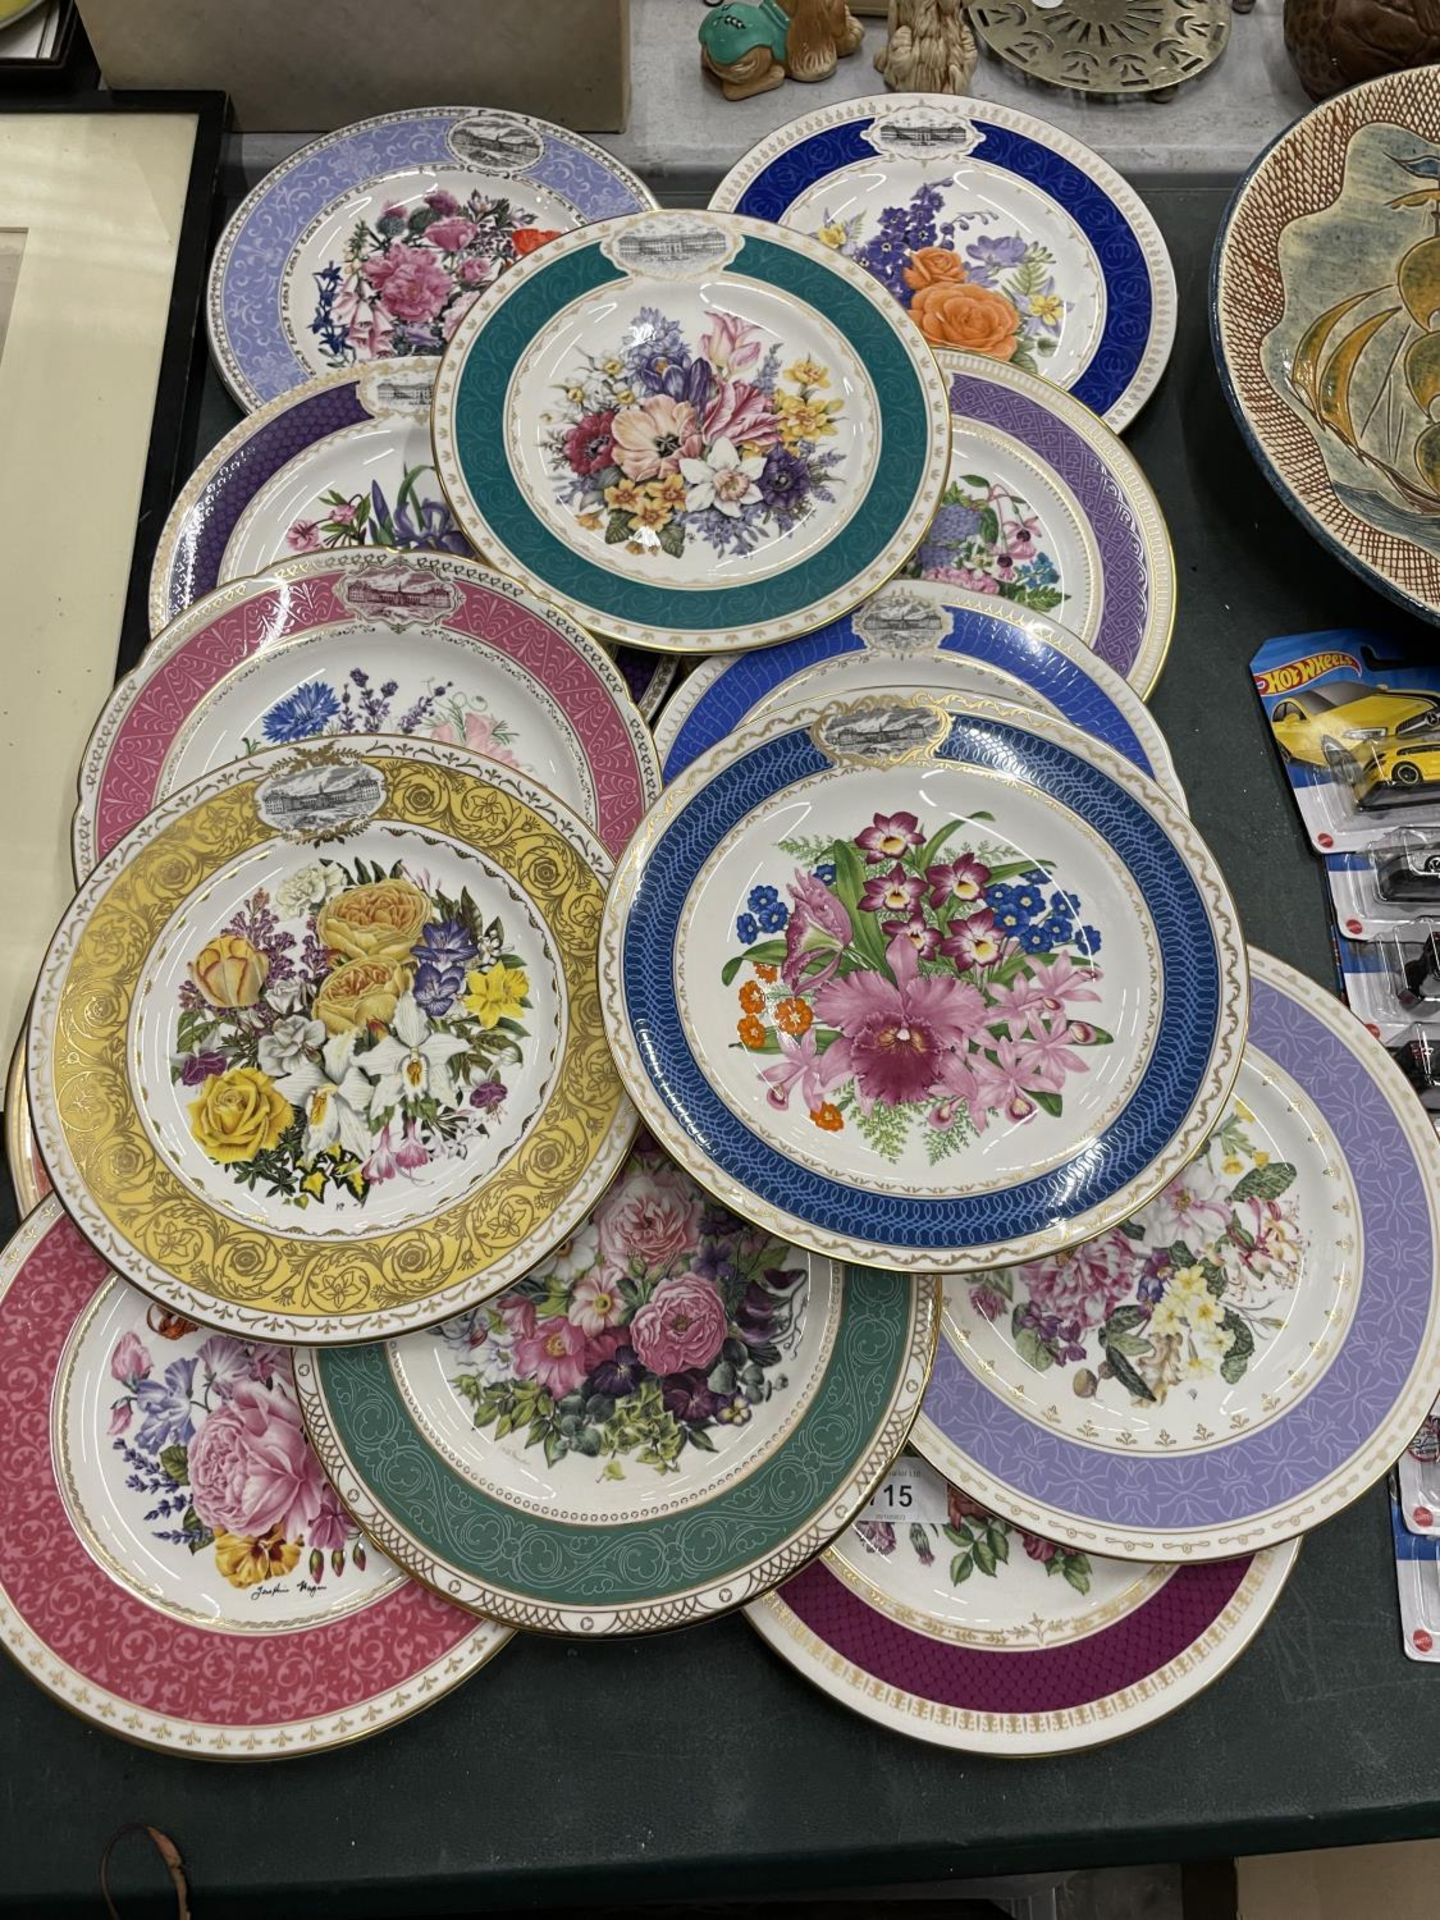 A SET OF SPODE ROYAL HORTICULTURE SOCIETY FLOWER SHOW CABINET/WALL PLATES - 15 IN TOTAL